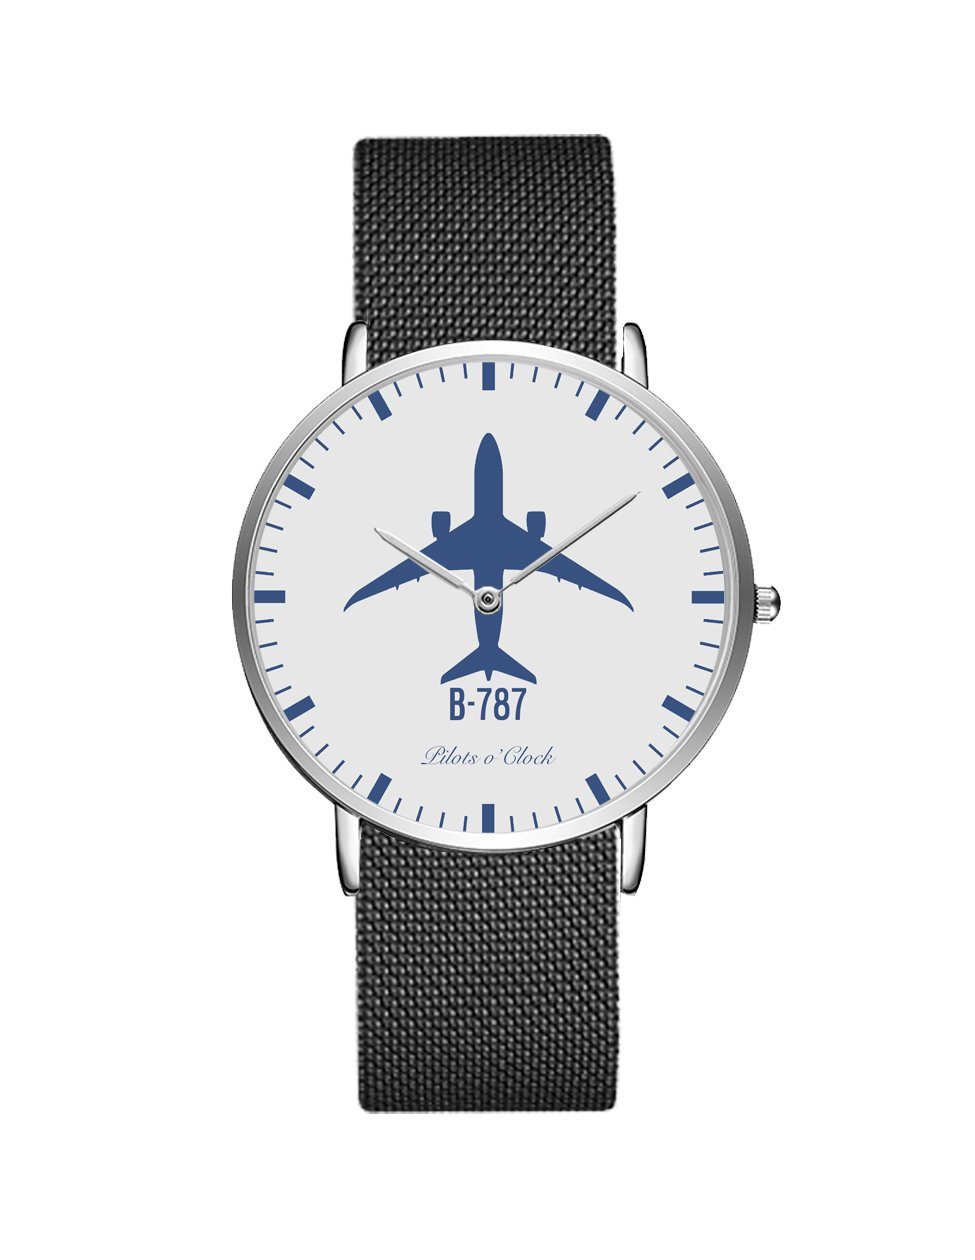 Boeing 787 Stainless Steel Strap Watches Pilot Eyes Store Silver & Black Stainless Steel Strap 